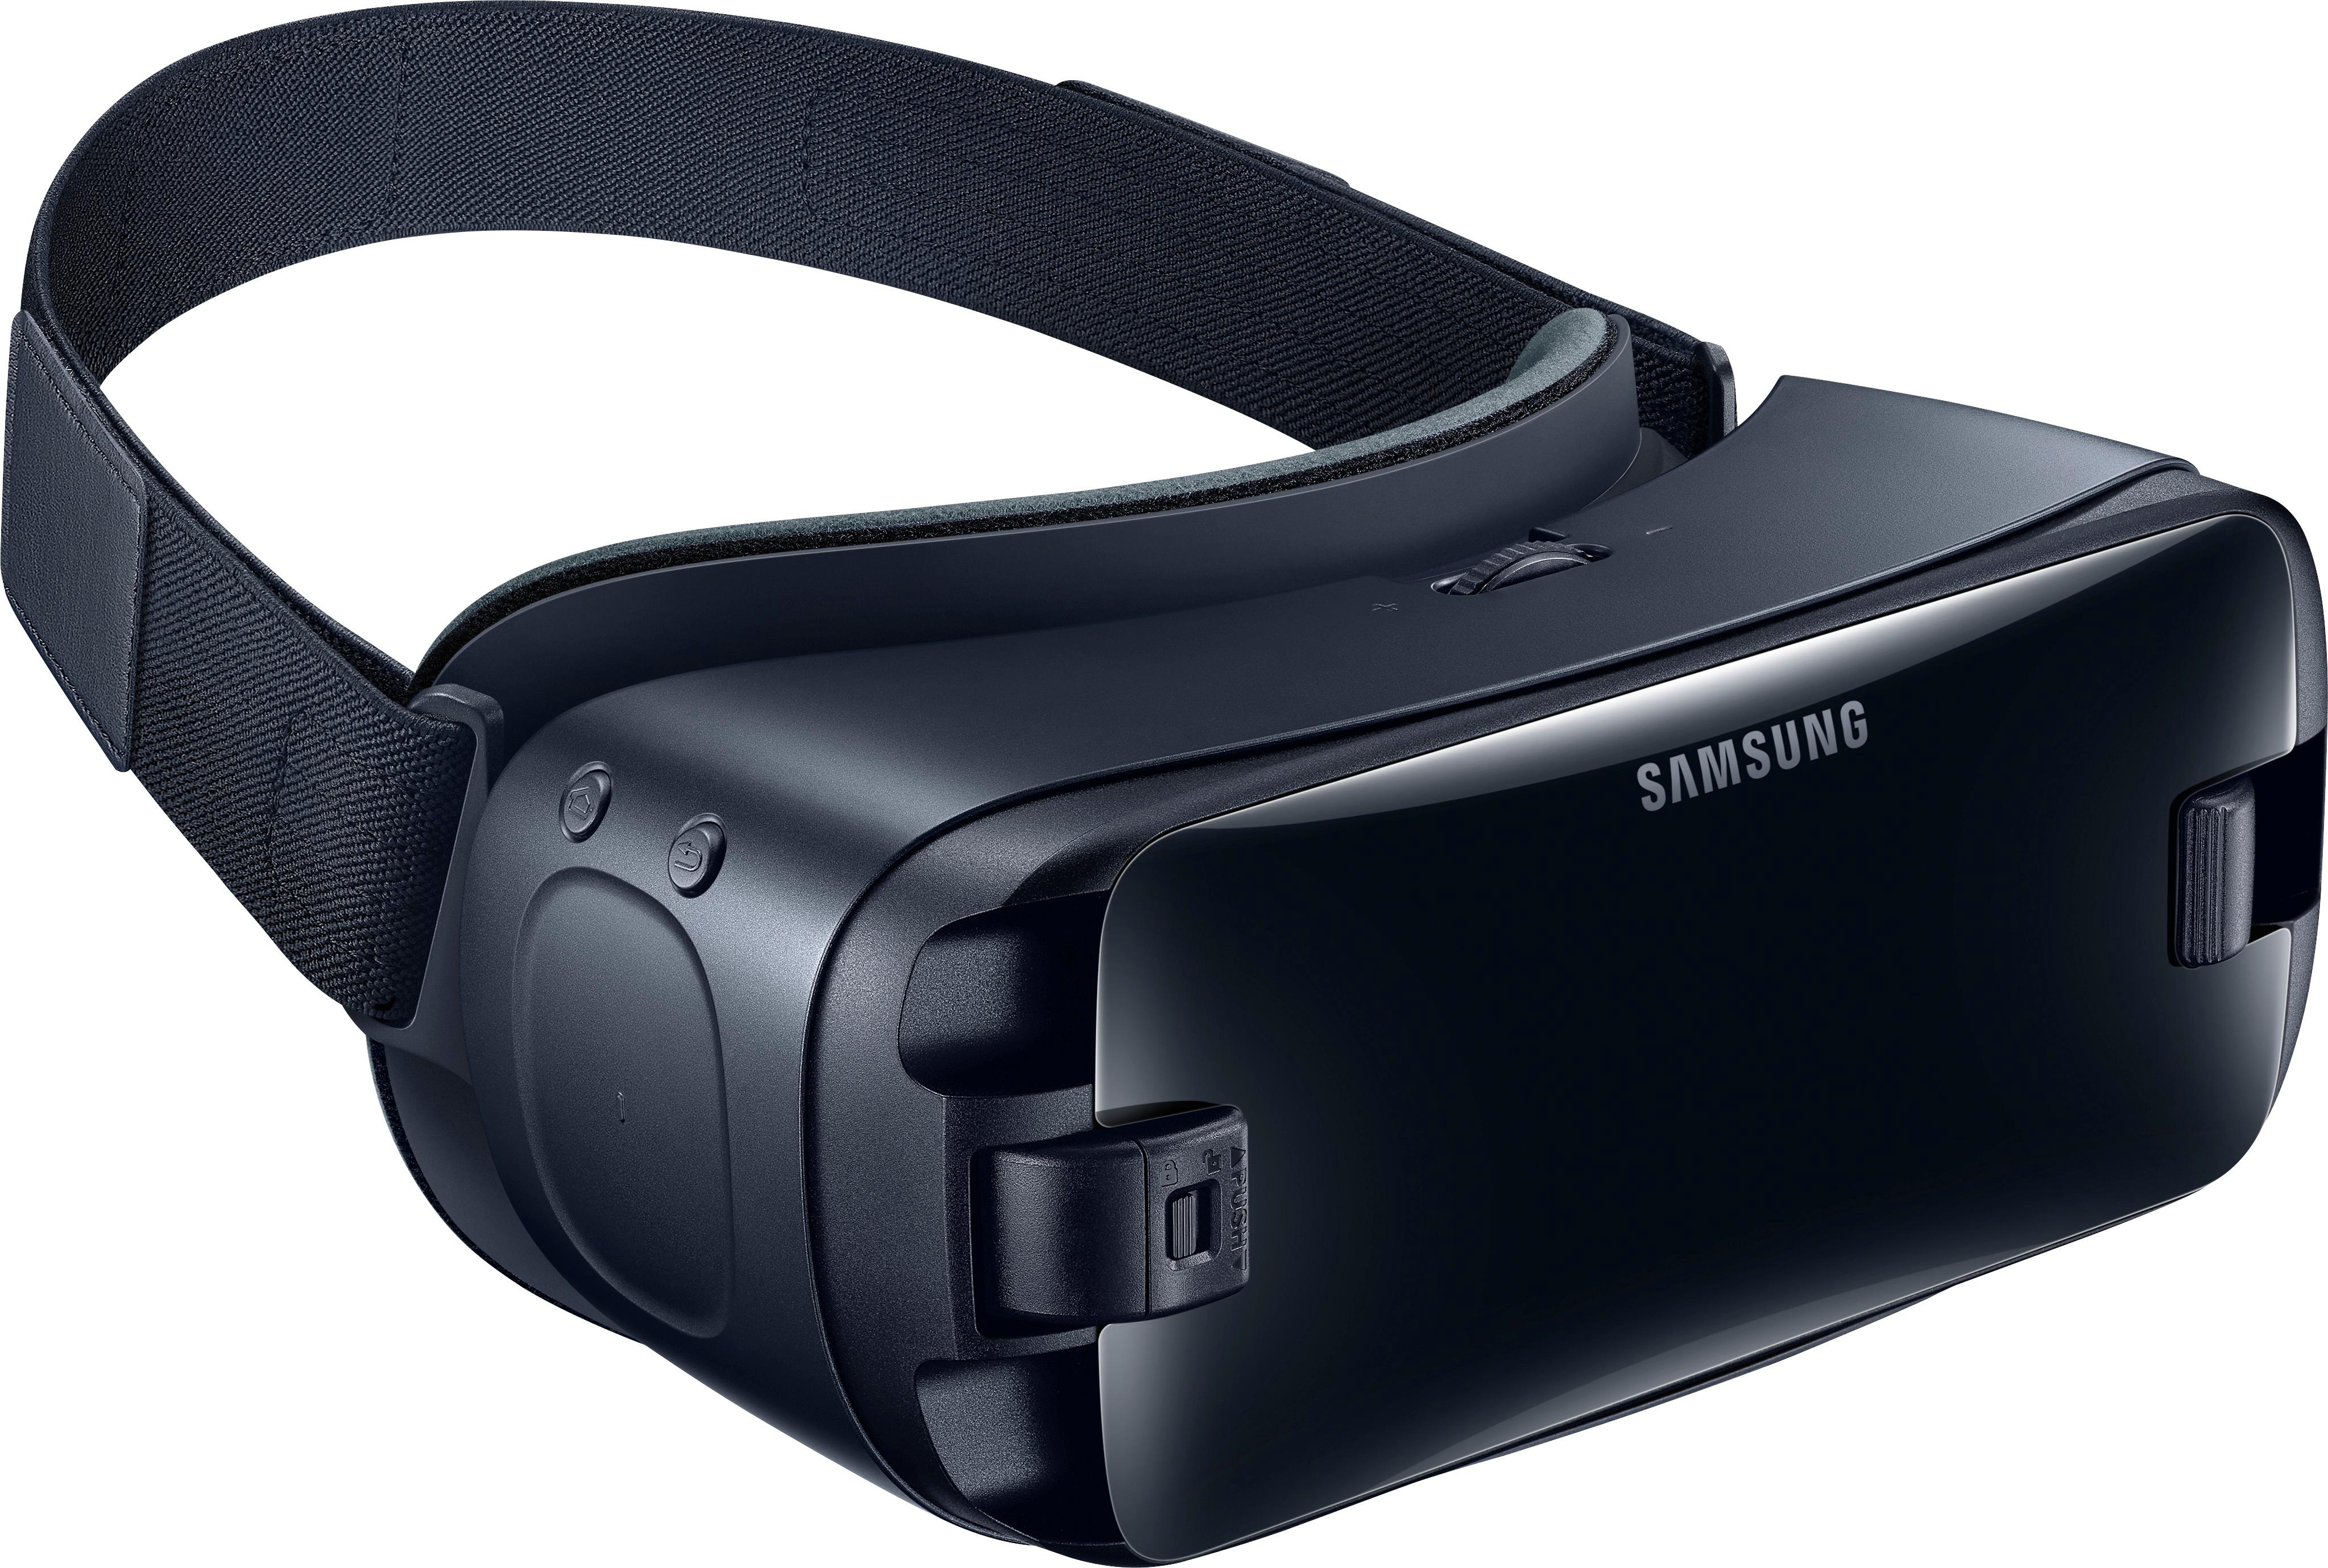 Questions And Answers Samsung Gear Vr Virtual Reality Headset Orchid Gray Sm R325nzvaxar Best Buy